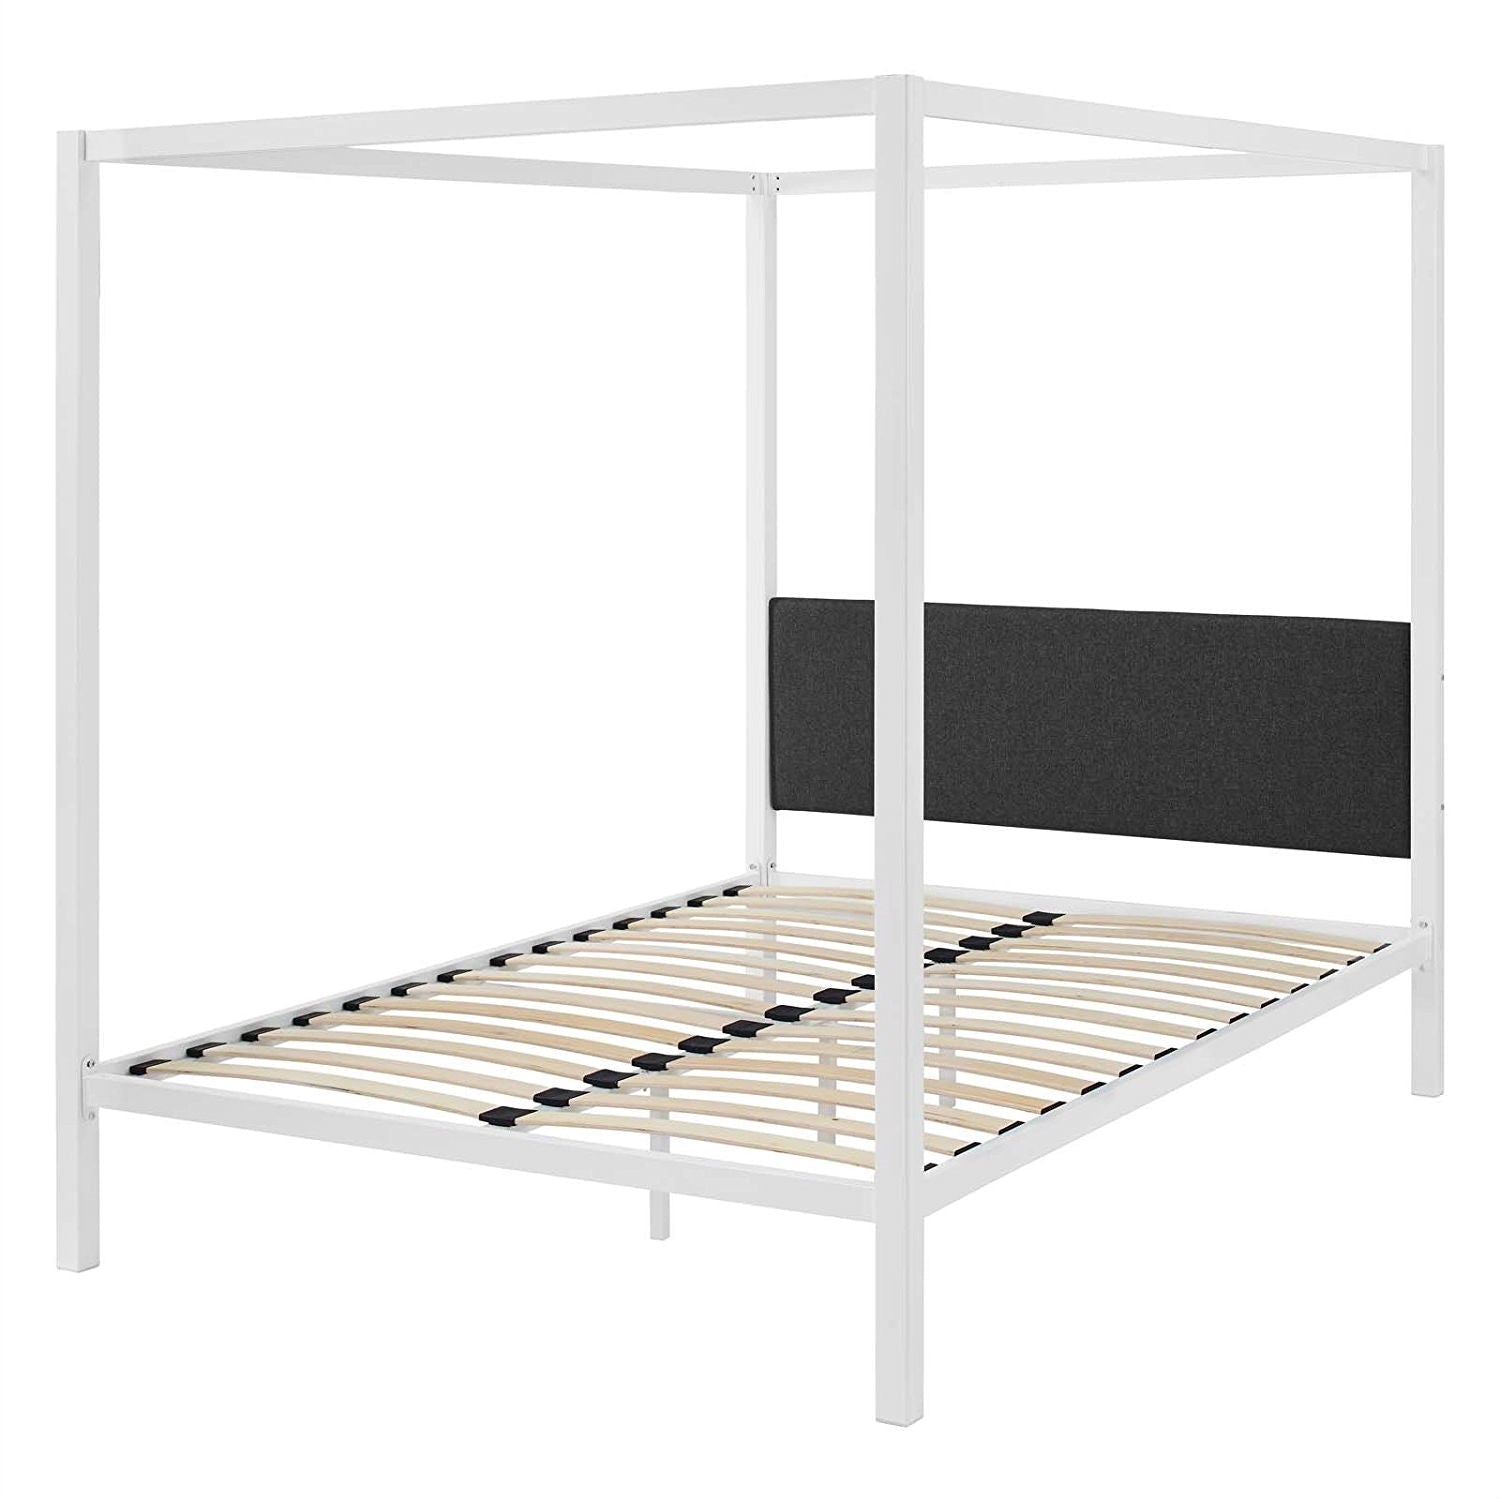 Bedroom > Bed Frames > Canopy Beds - Queen Size White Metal Canopy Bed Frame With Grey Fabric Upholstered Headboard